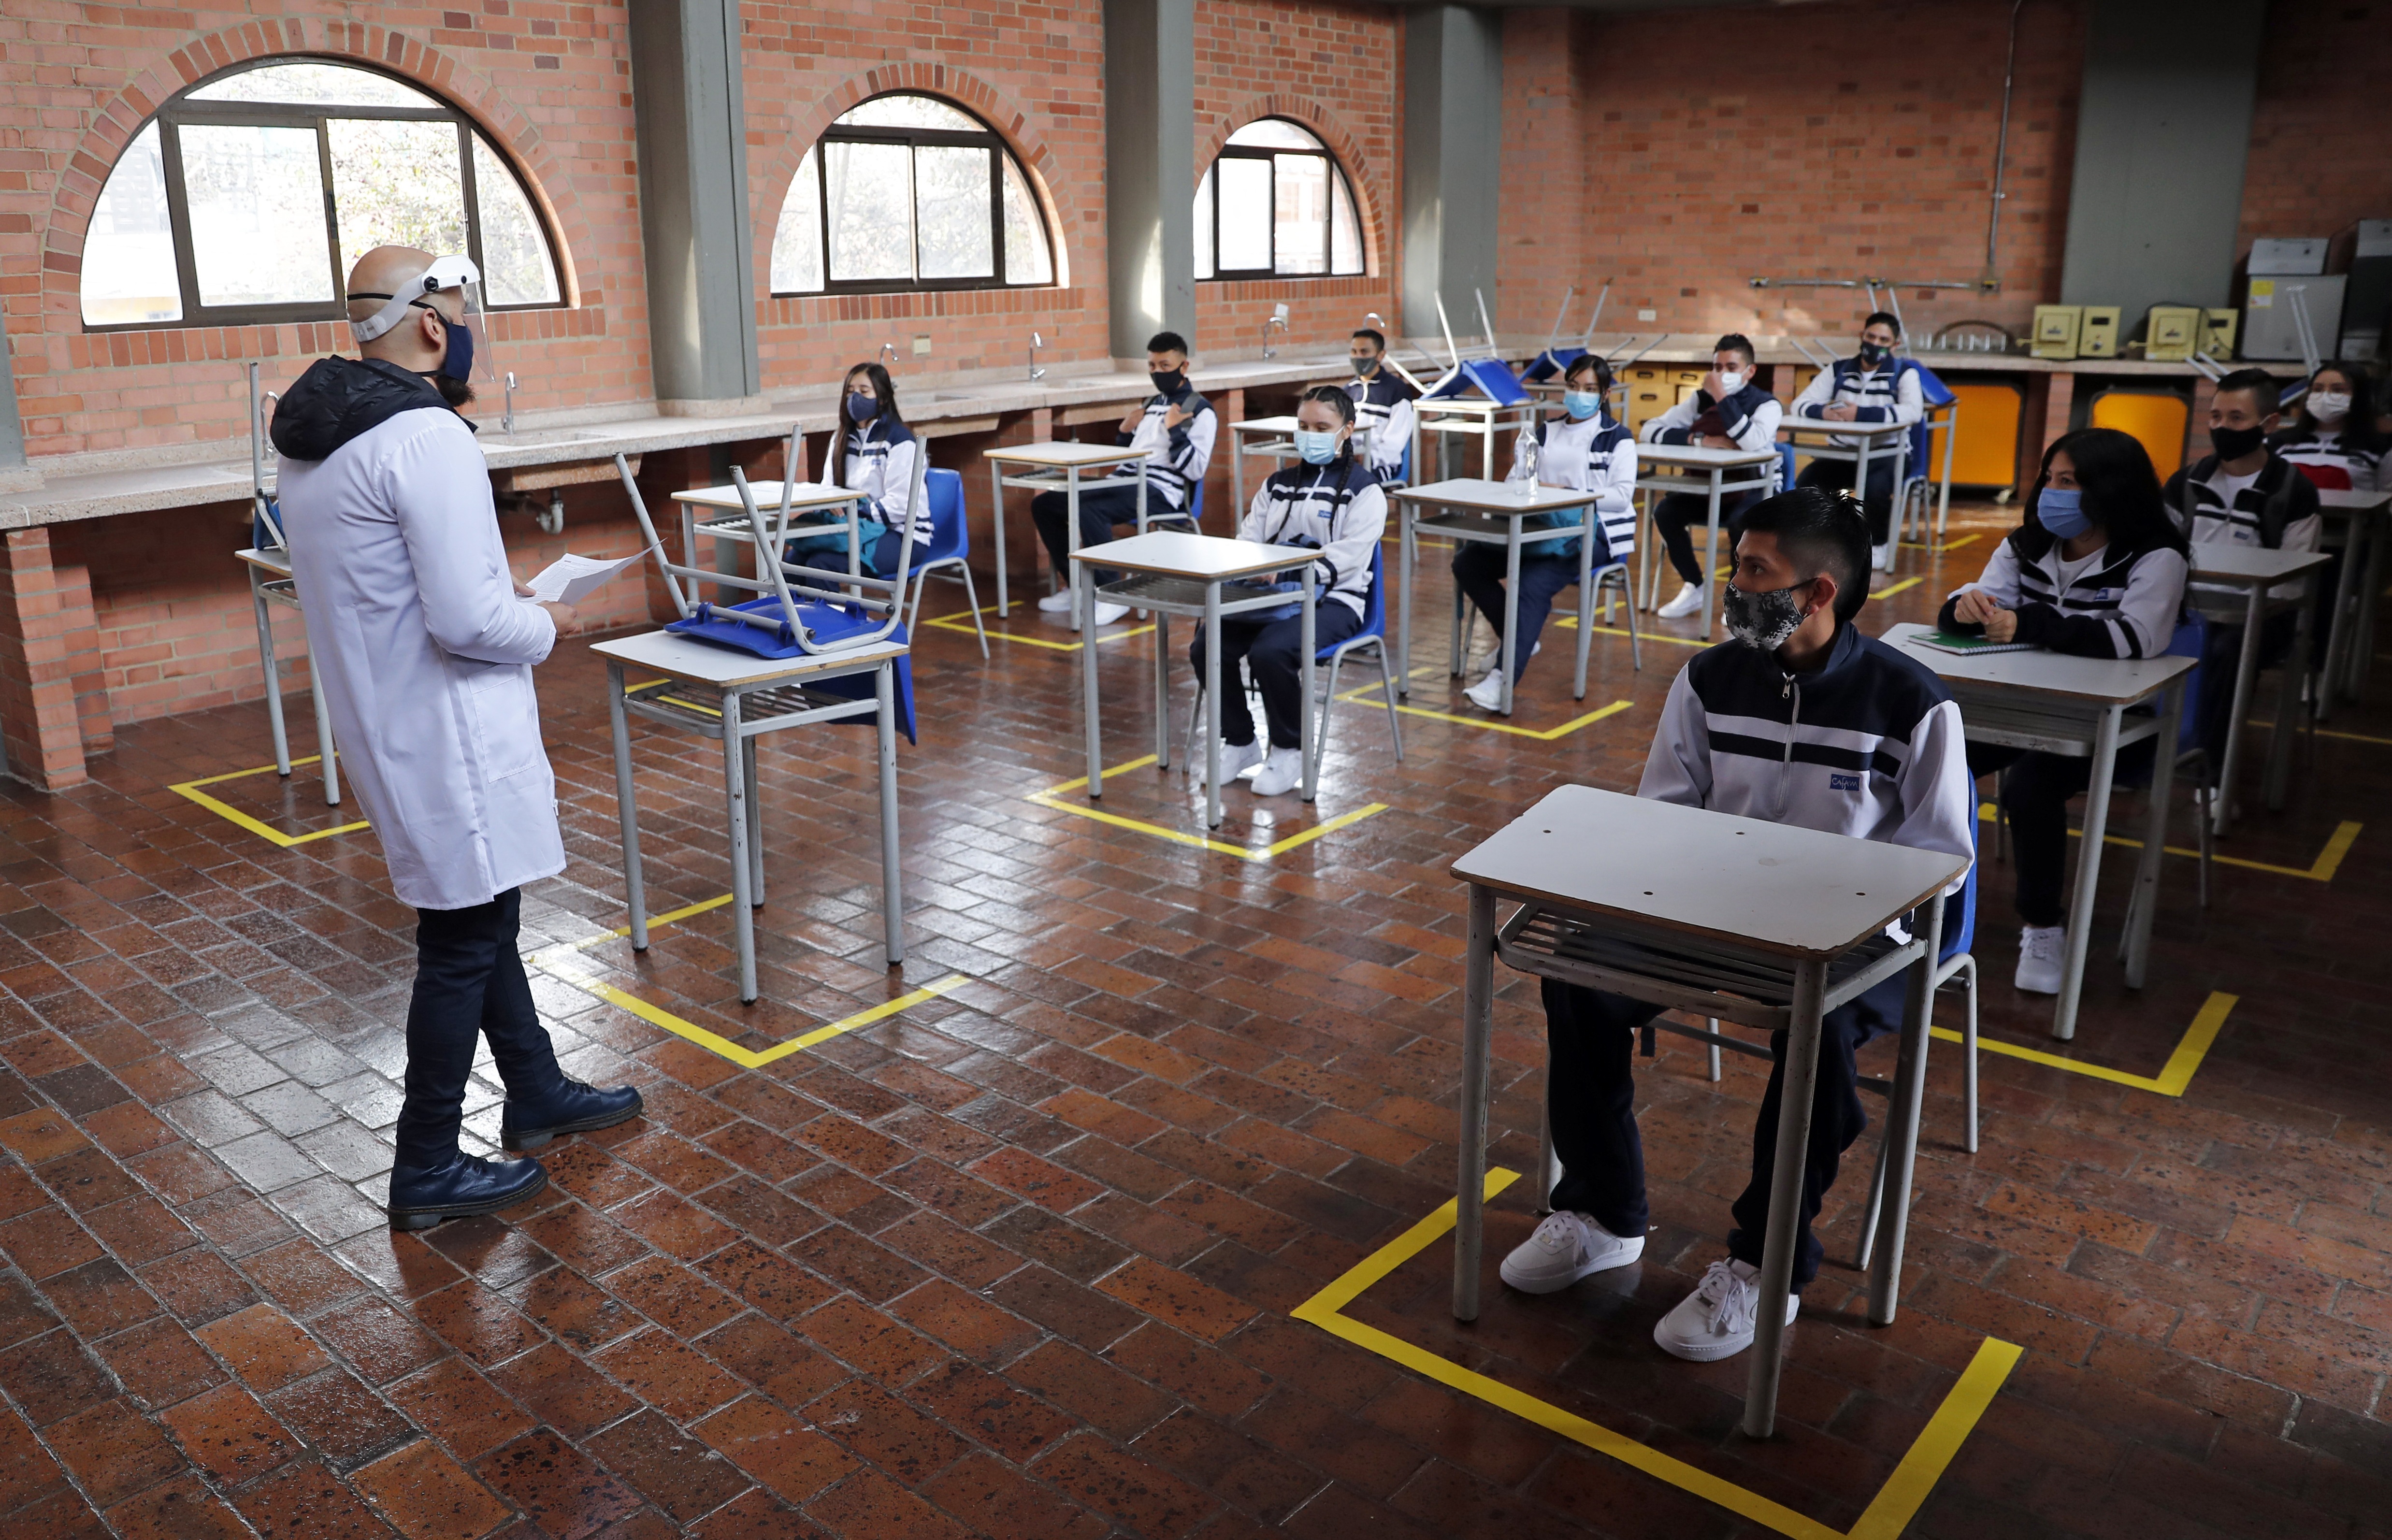 File image Students attend class at a school in Bogota, Colombia, in a file photo.  Photo: EFE/Mauricio Dueñas Castañeda